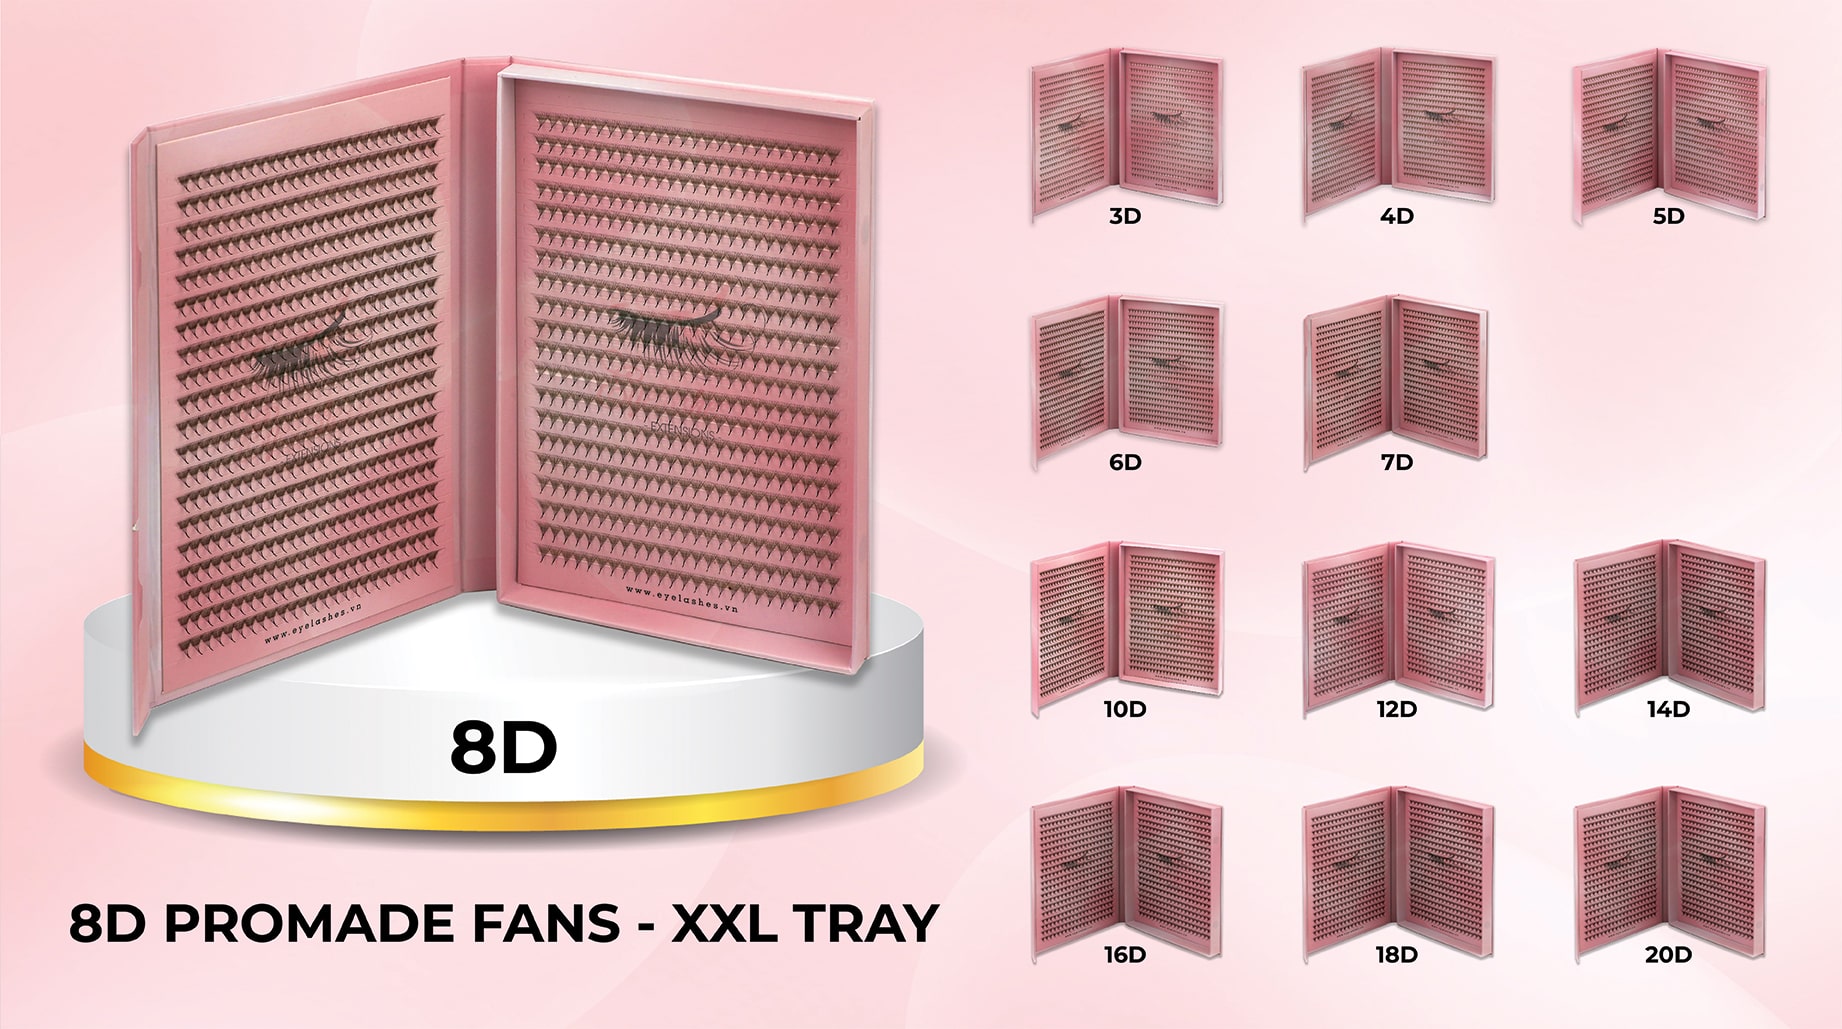 8D-promade-fan-XXL-Tray-wholesale-eyelash-supplier-VNLASHES